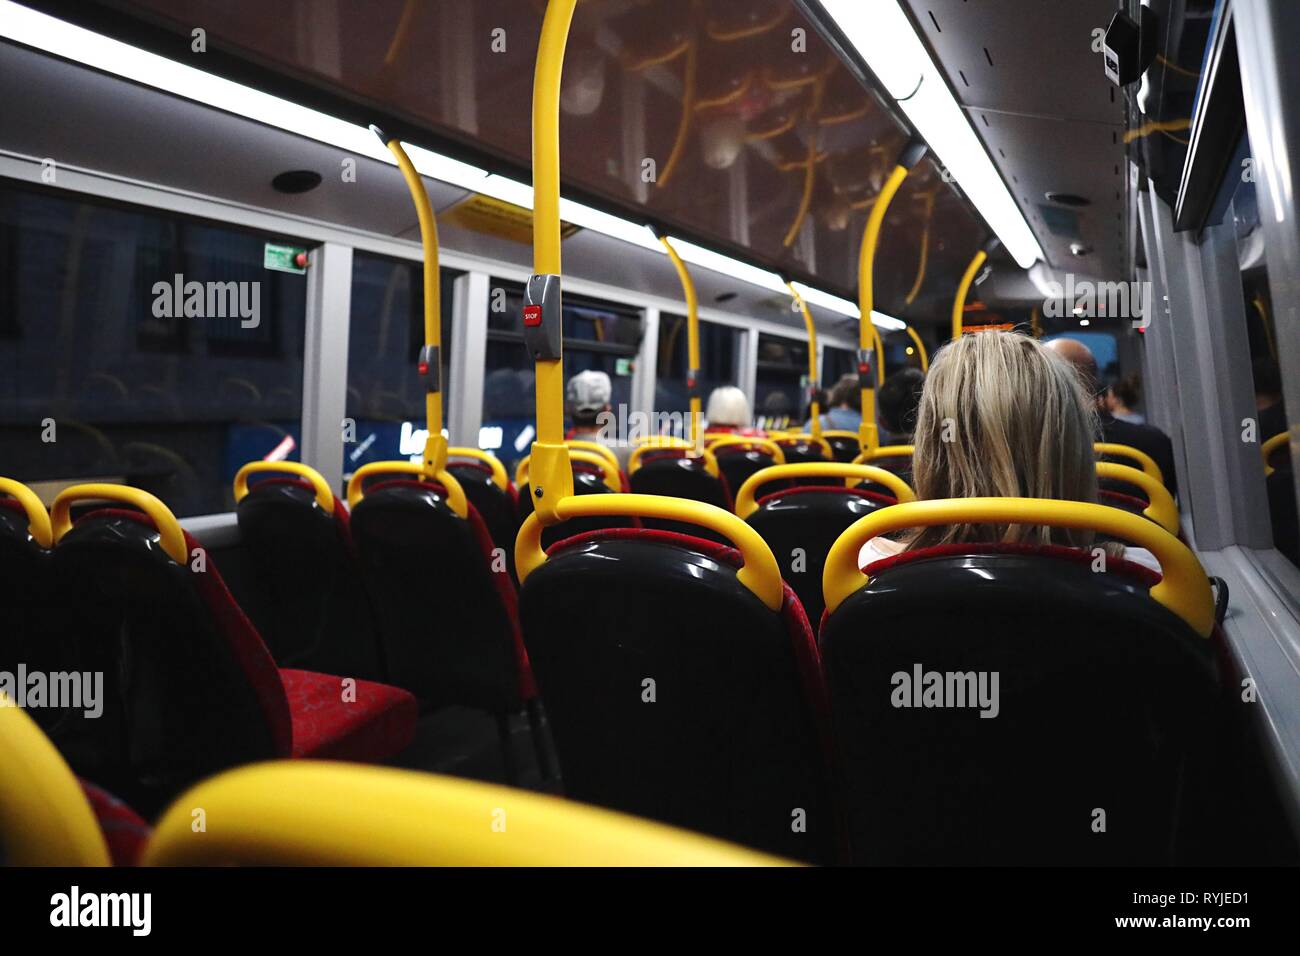 Bus passengers on the top deck of a night bus, London, England, UK Stock Photo